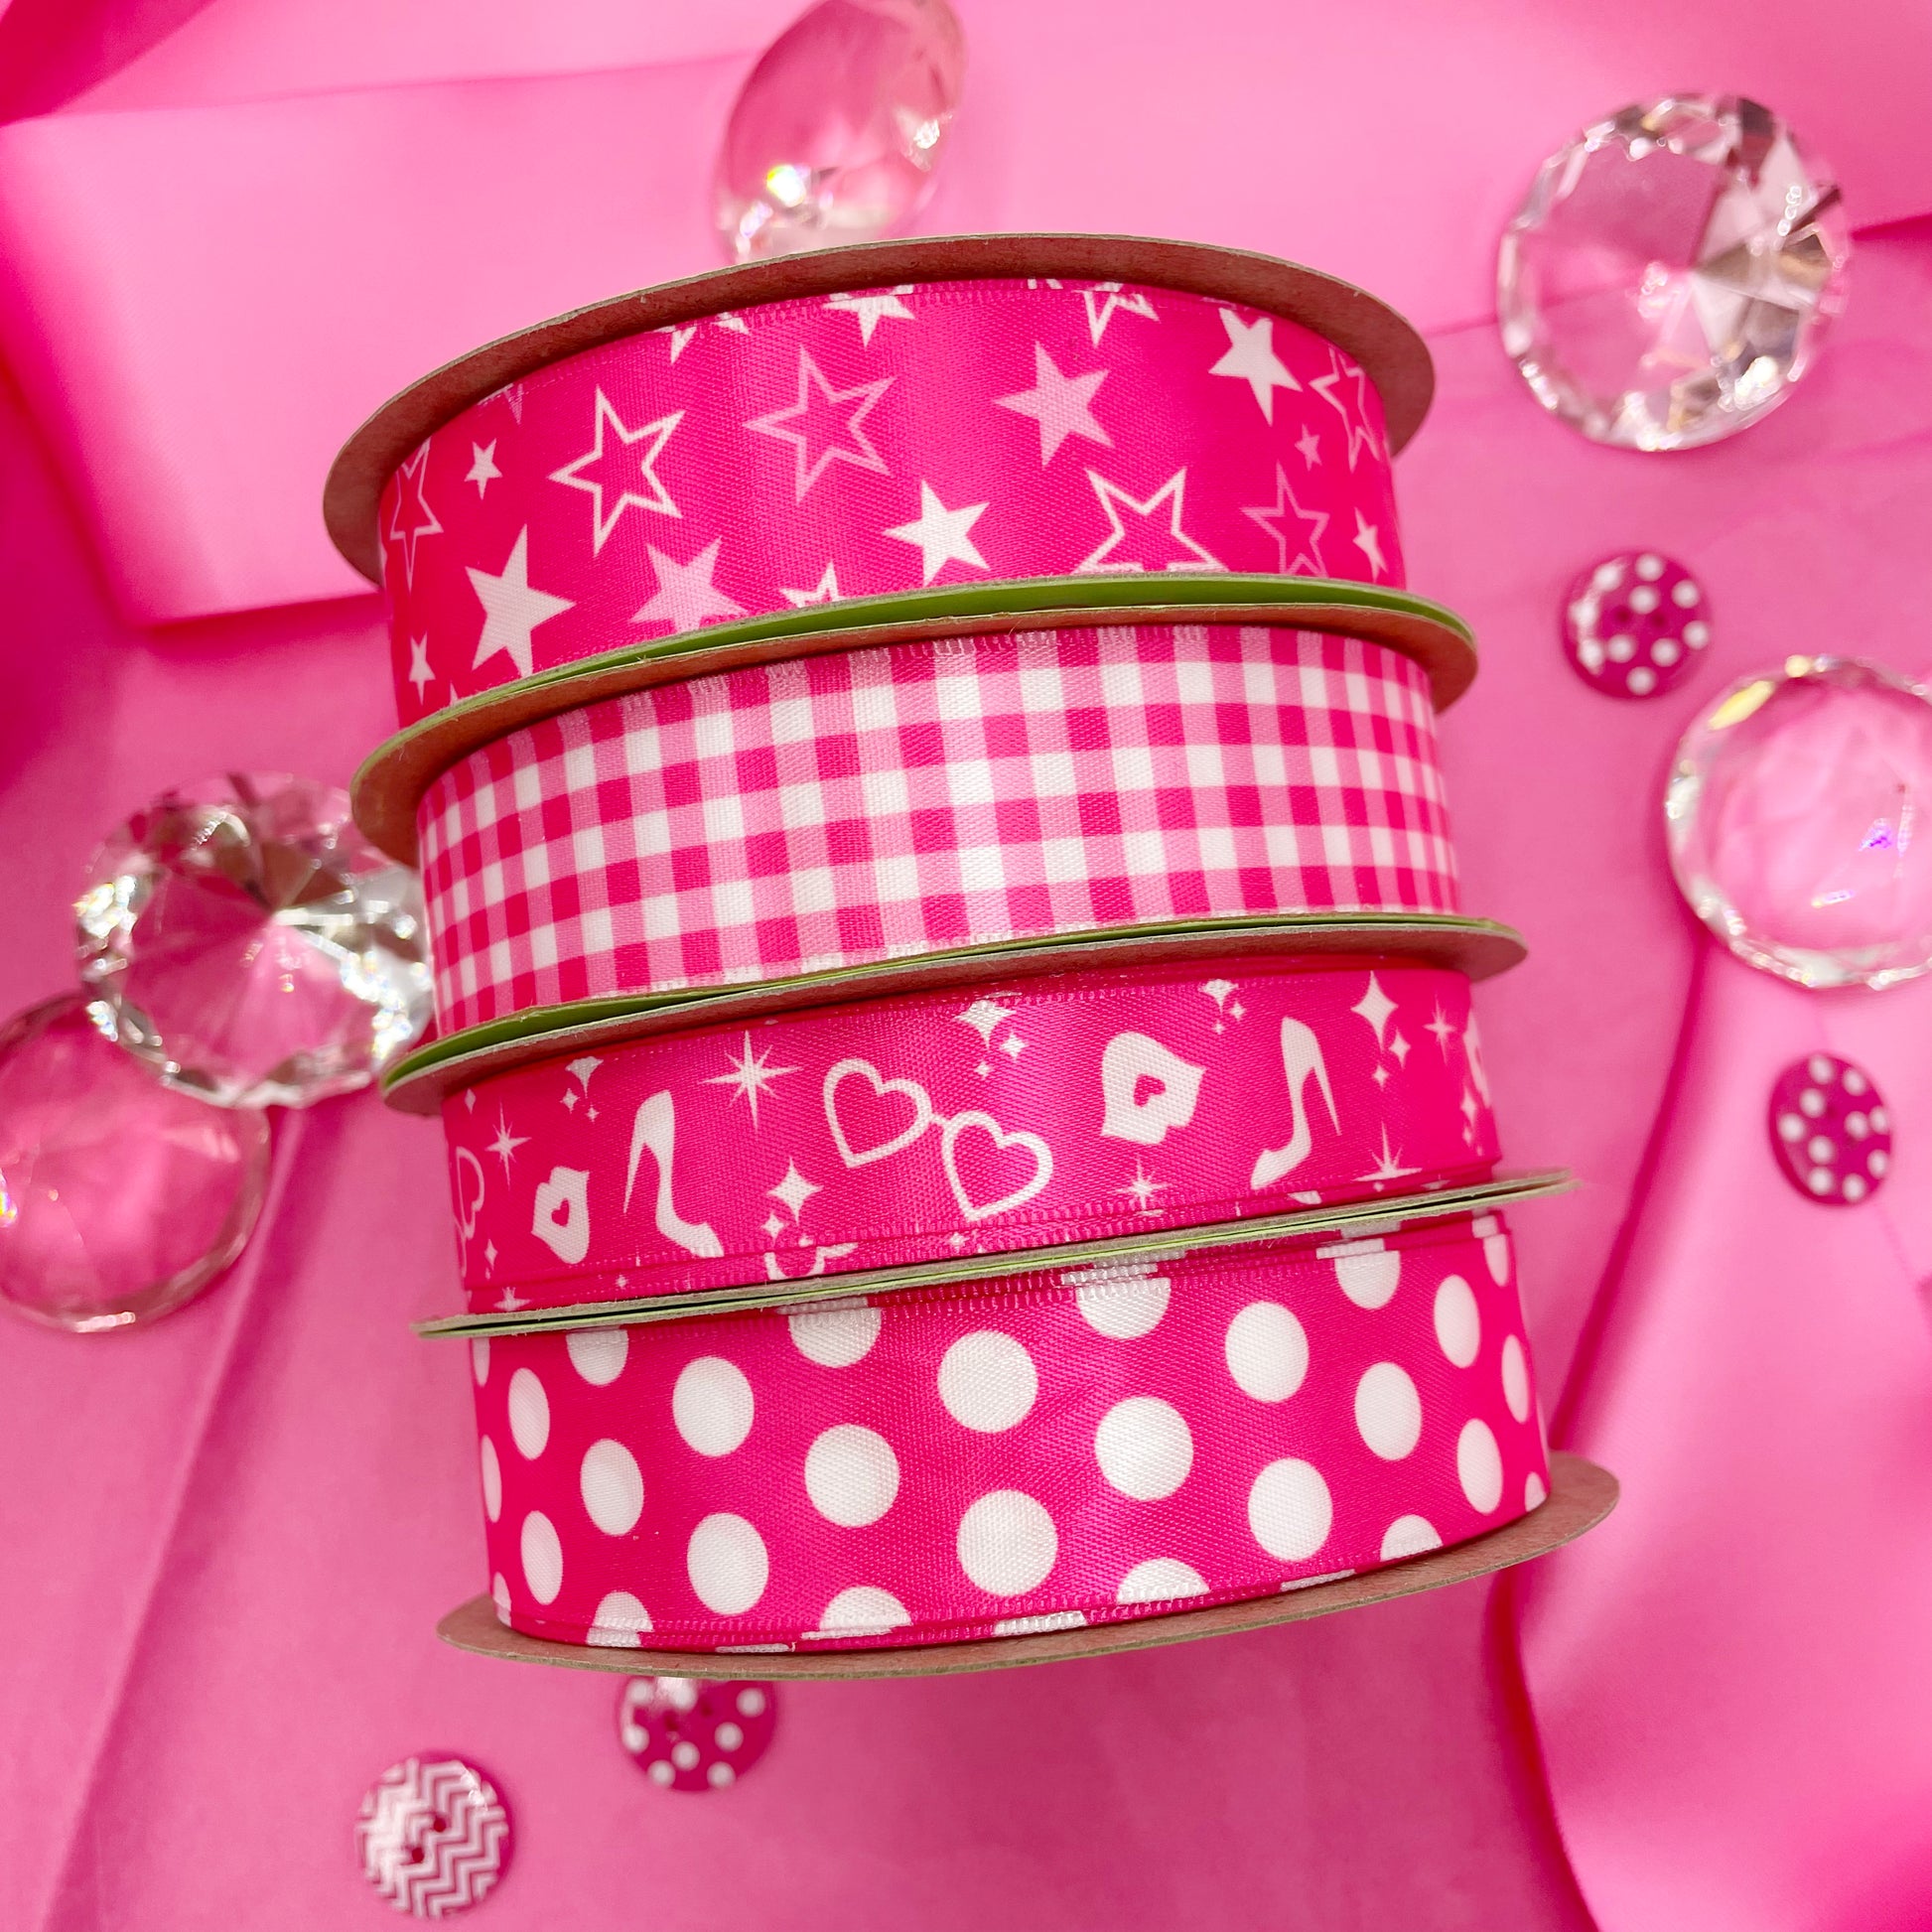 Having a Barbie themed party? Add these lovely pink ribbons to gift wrap, party decor, gift basket, party favors, center pieces and Barbie theme actiivities!